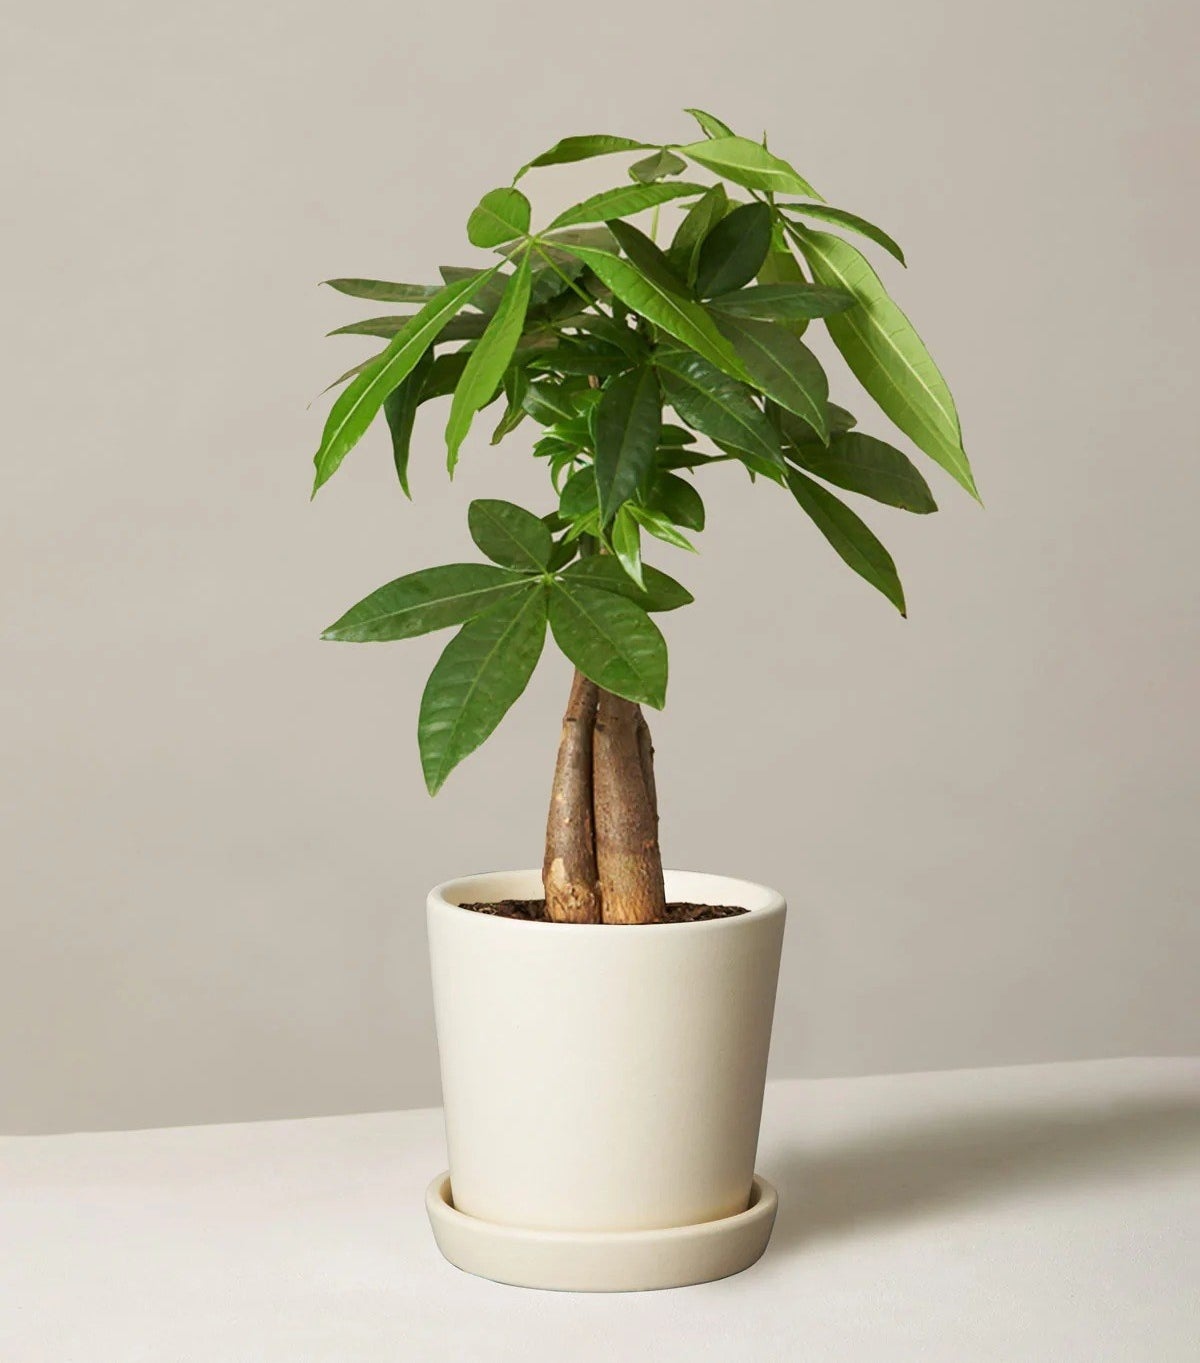 Money Tree growing inside a white planter on a white background.